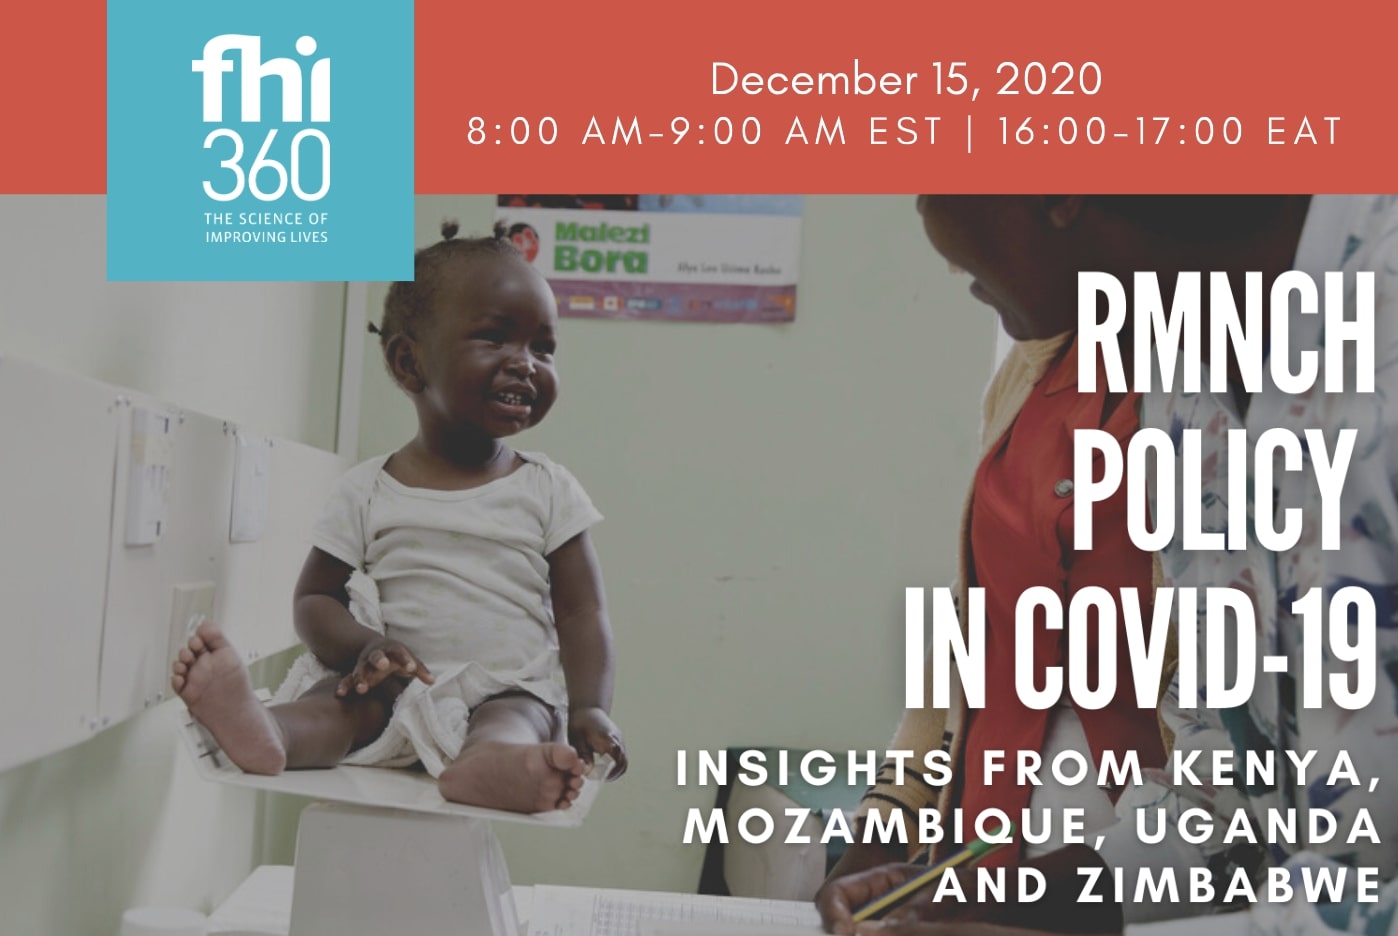 RMNCH Policy in COVID-19: Insights from Kenya, Mozambique, Uganda and Zimbabwe